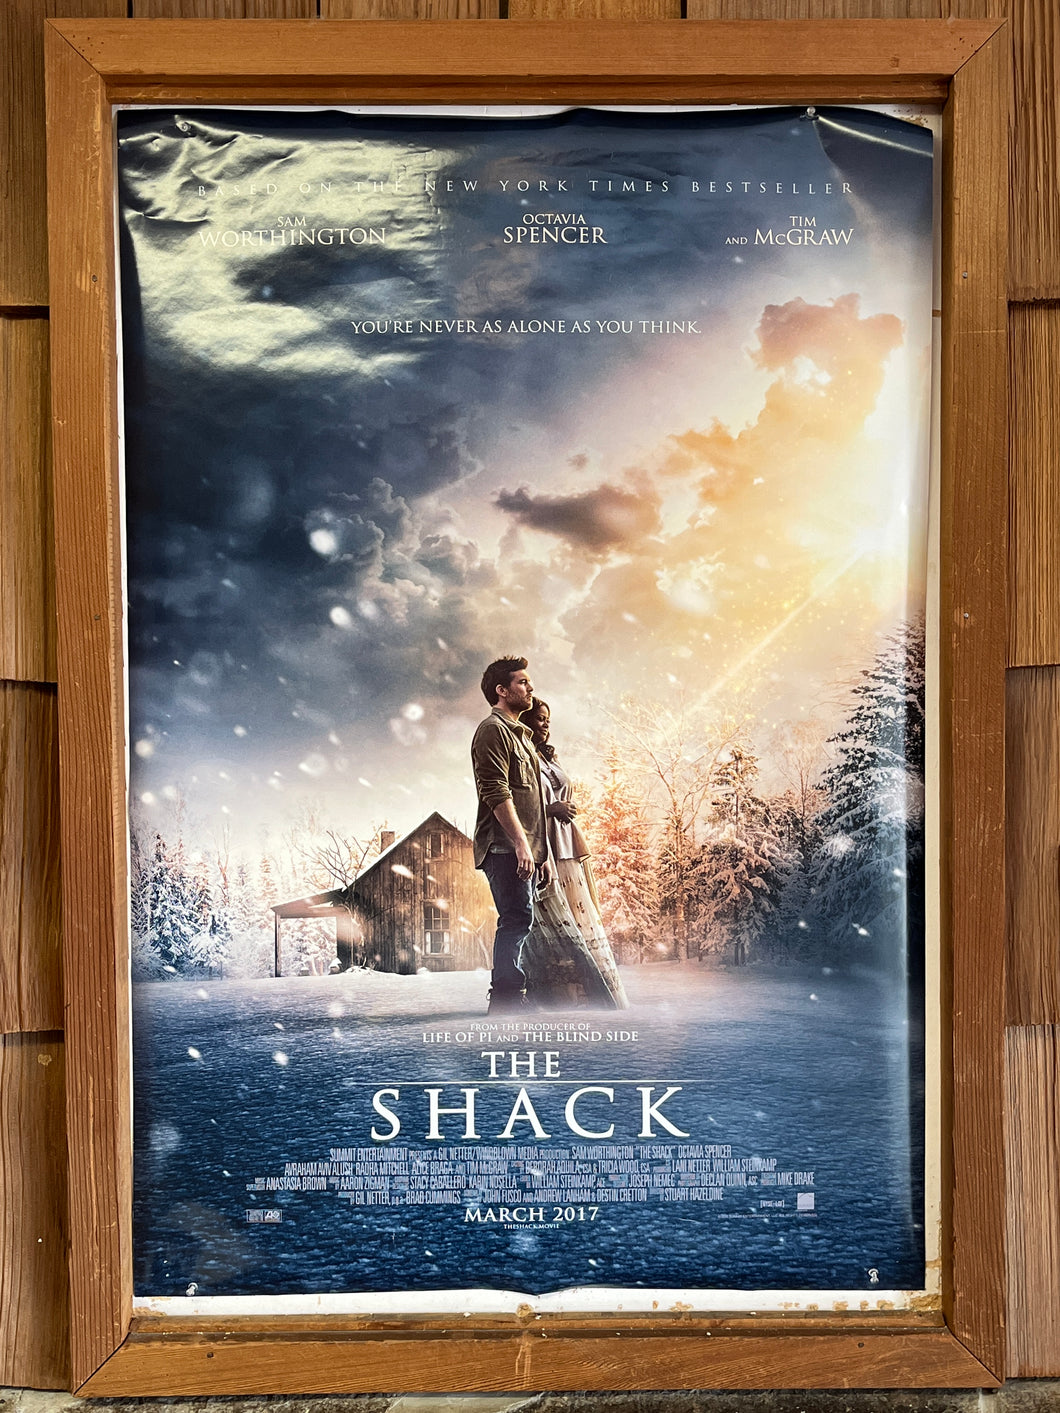 Shack, The (2017)